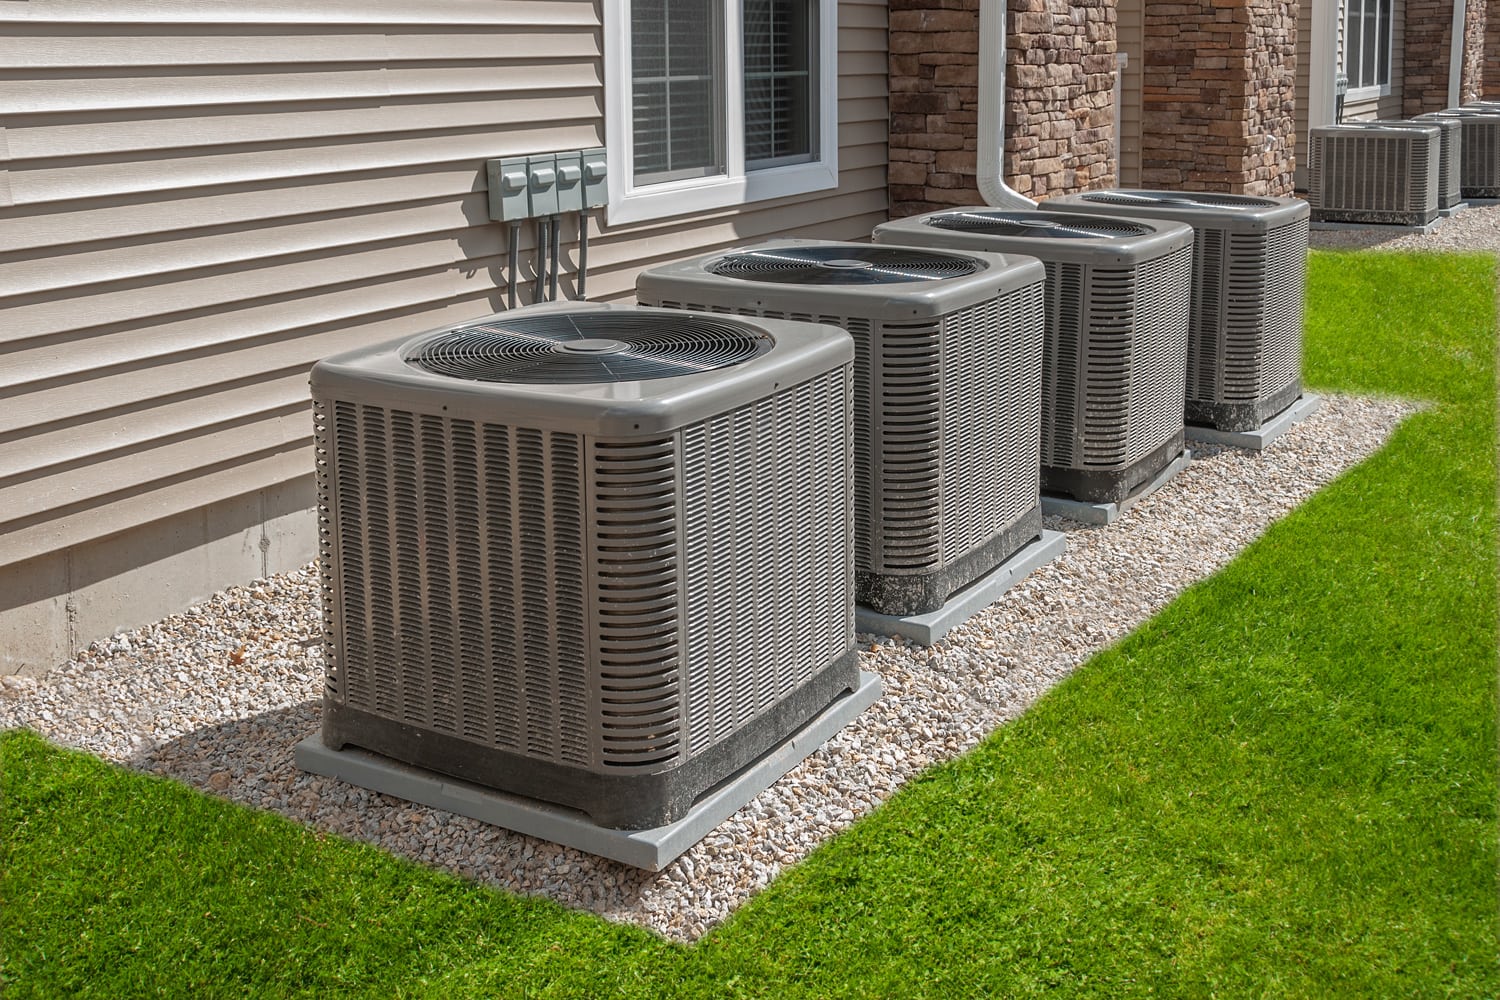 Modern air conditioning and heating units or heat pumps, used in homes without central air conditioning